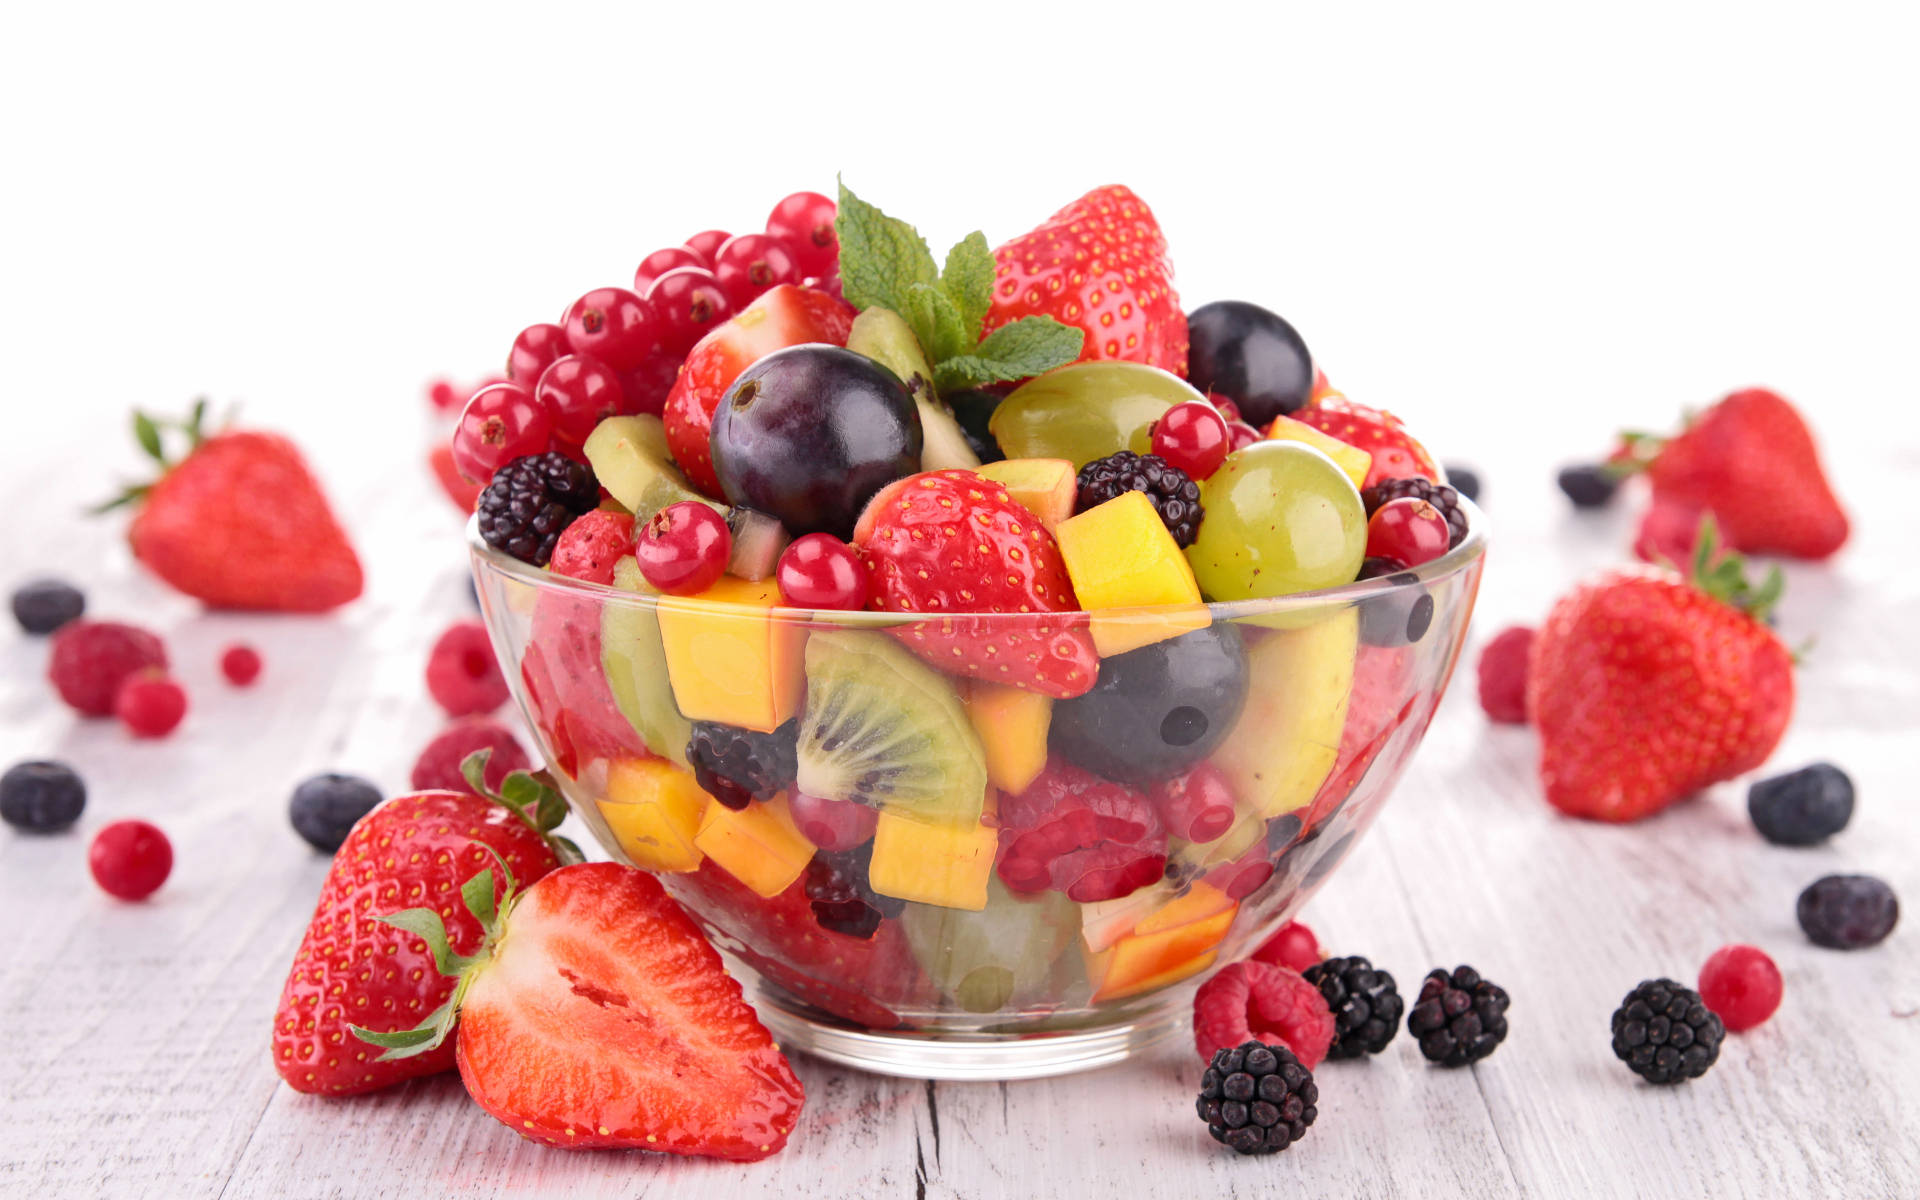 Bowl Of Assorted Berries